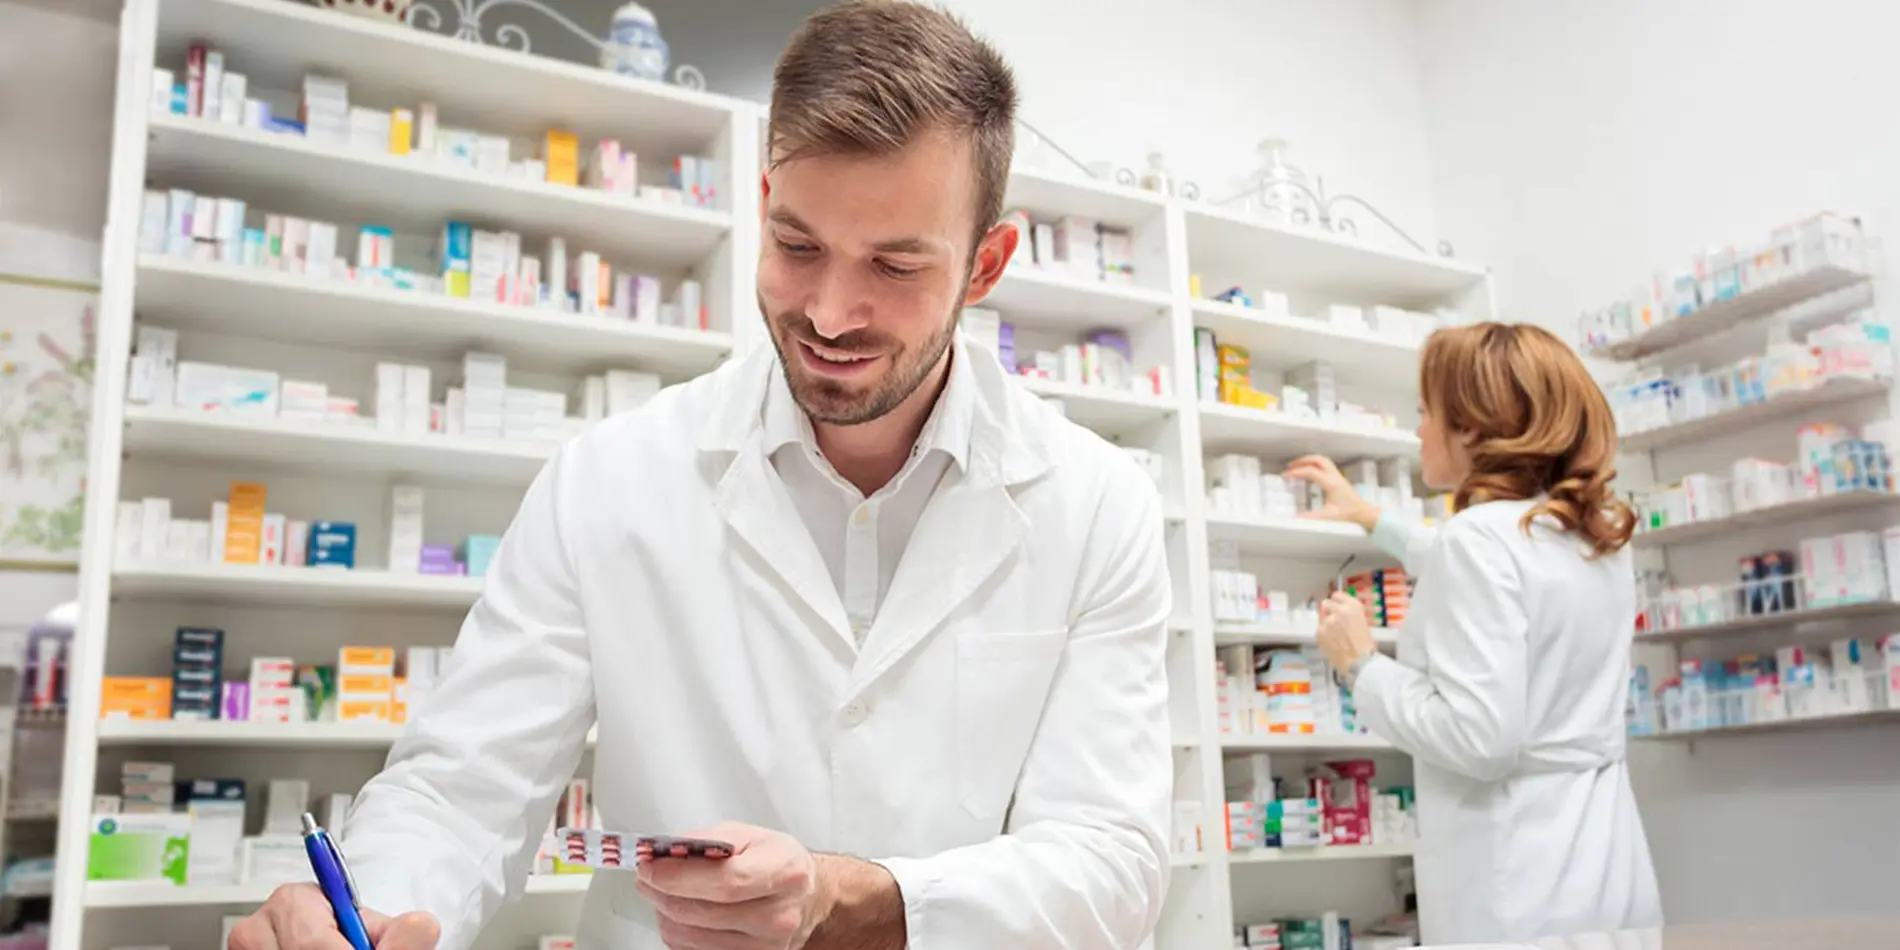 A pharmacist is looking down and writing as they hold a sheet of tablet pills. Pills line the wall in the room. Another pharmacist is in the background, facing the wall, organizing.